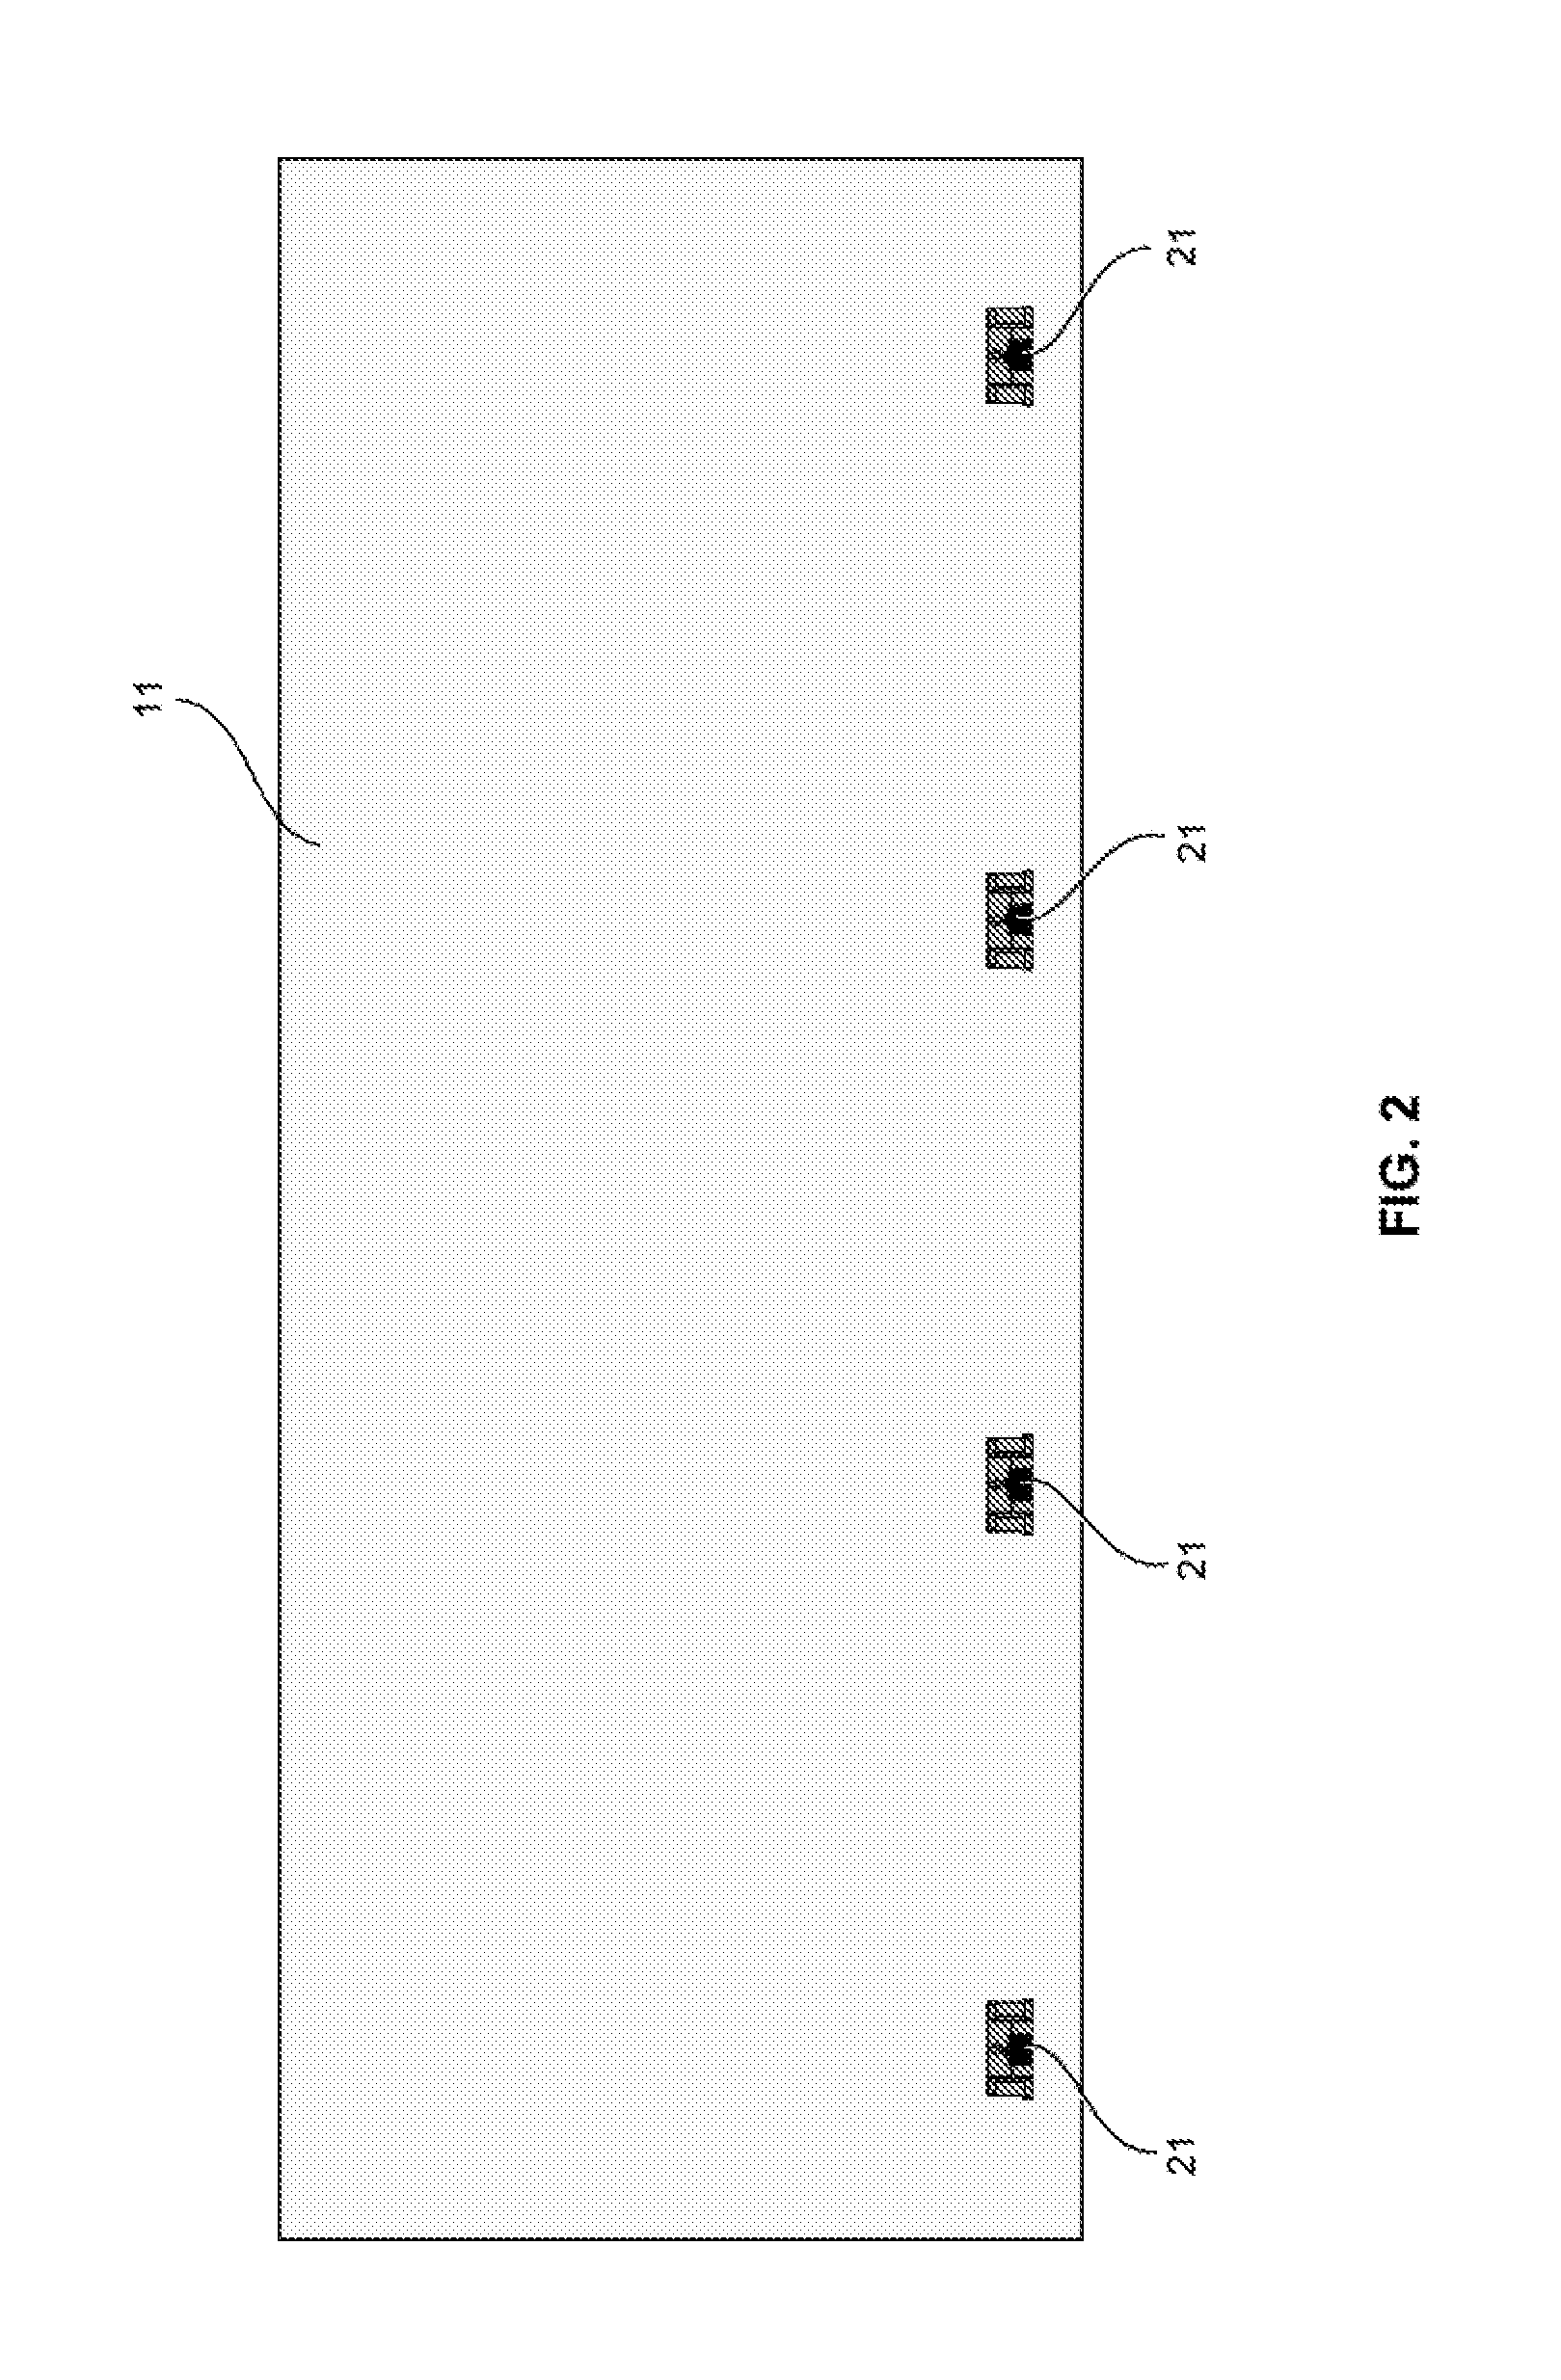 Method of Pre-Attaching Assemblies to an Electrochromic Glazing for Accurate Fit or Registration After Installation